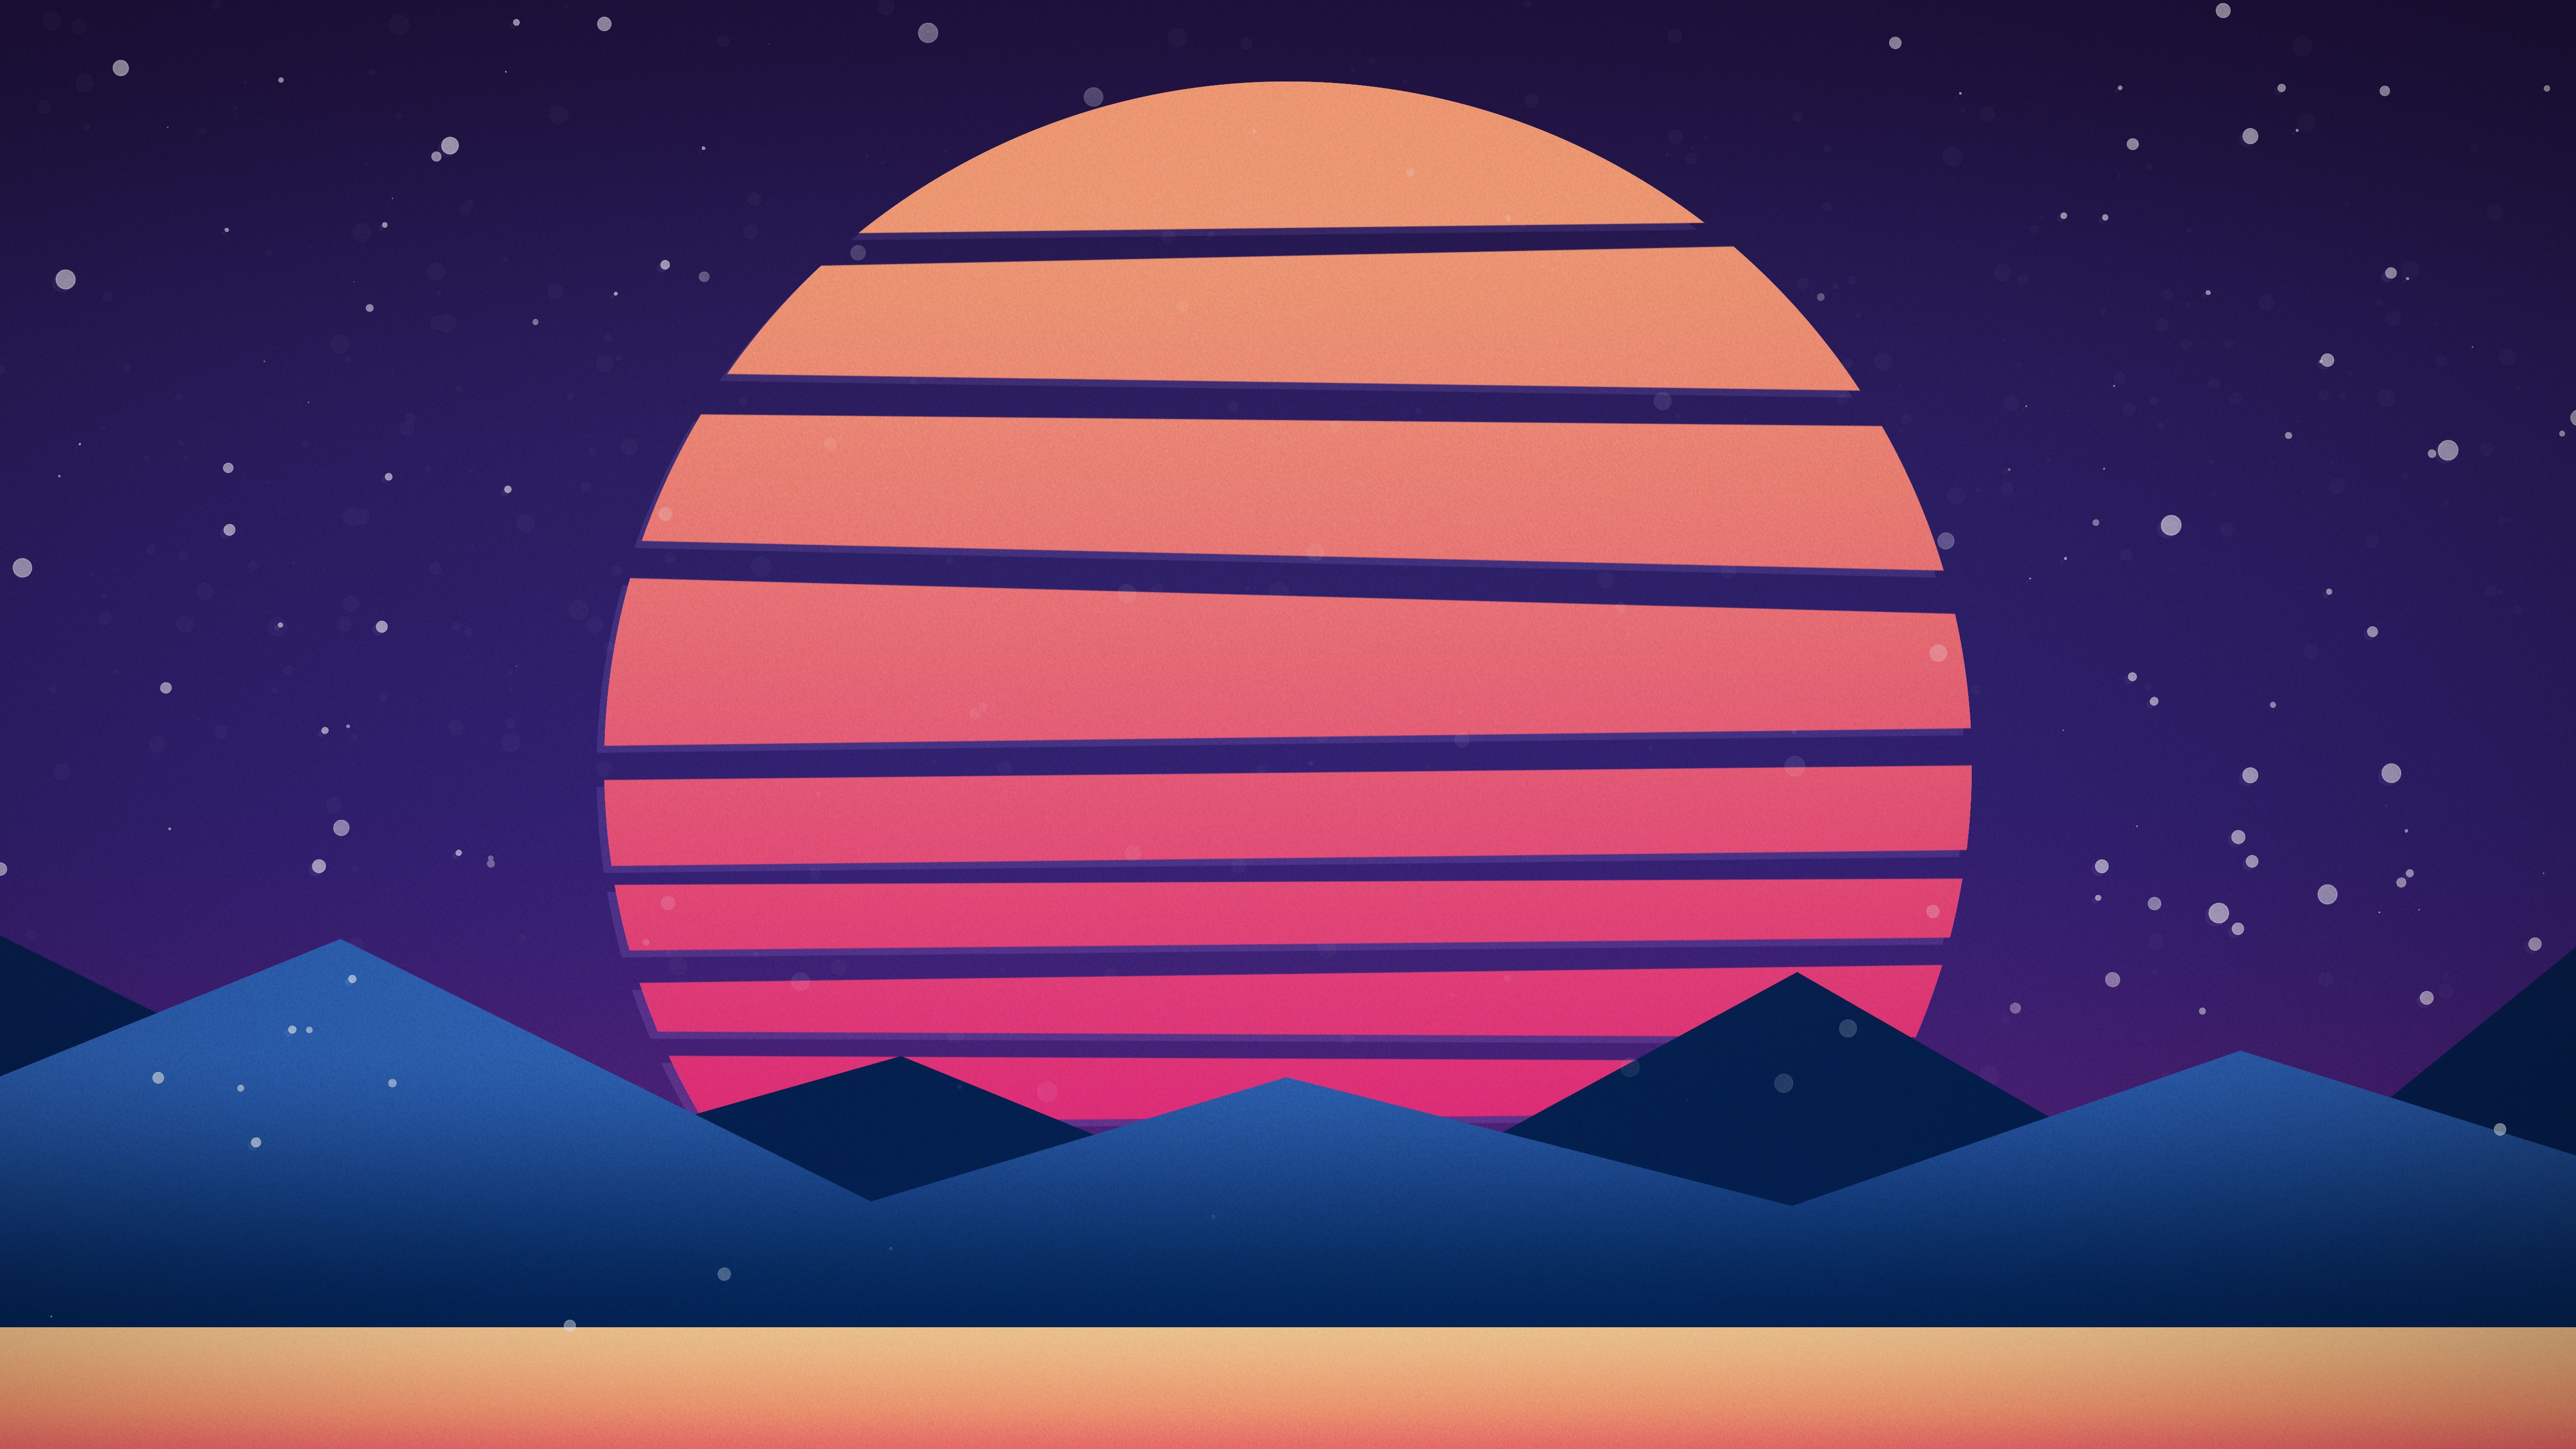 Synthwave Hd Alone Artistic Wallpapers